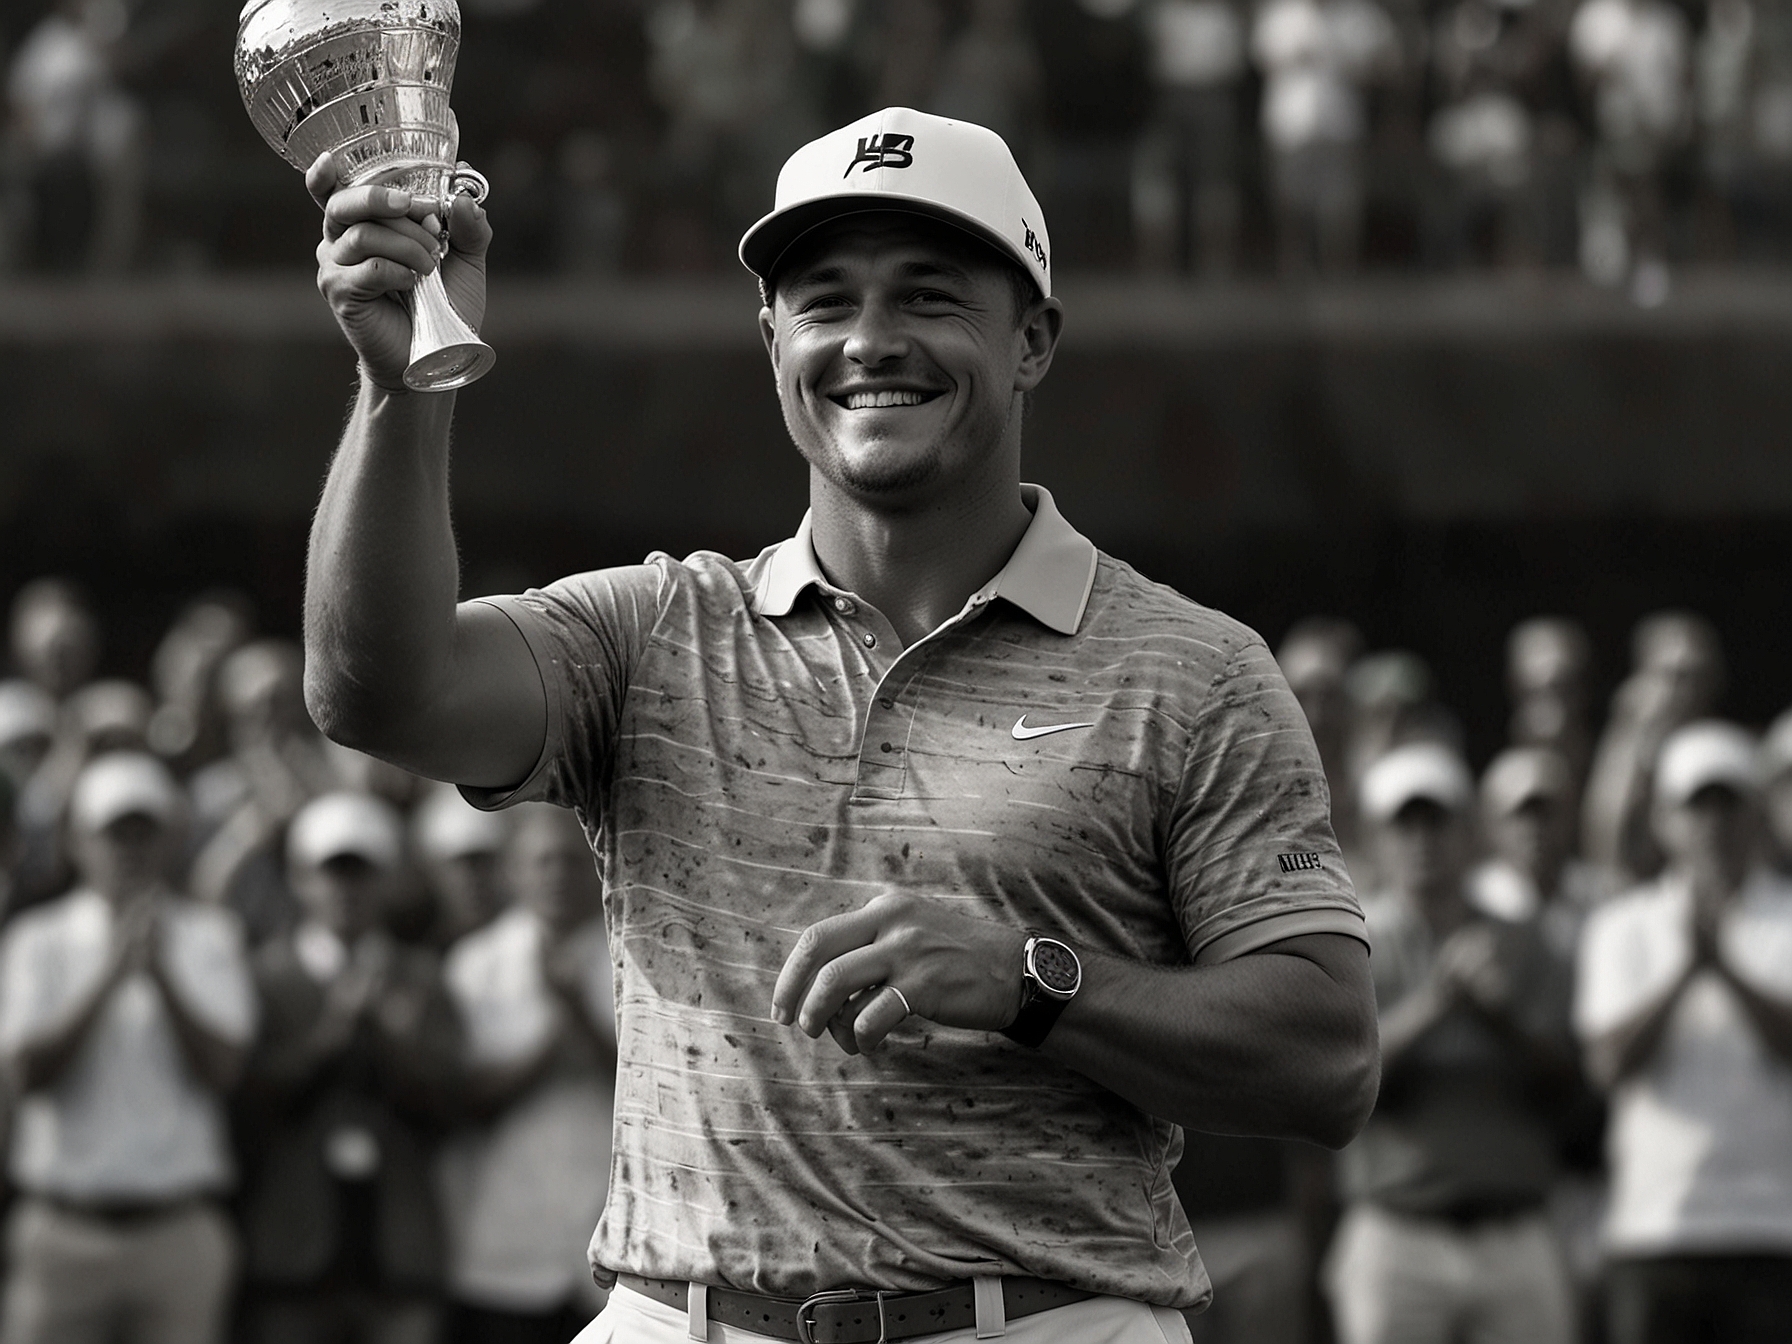 Bryson DeChambeau celebrates his U.S. Open victory on the 18th green, holding the championship trophy aloft with a triumphant smile, showing his joy and relief after a tough competition.